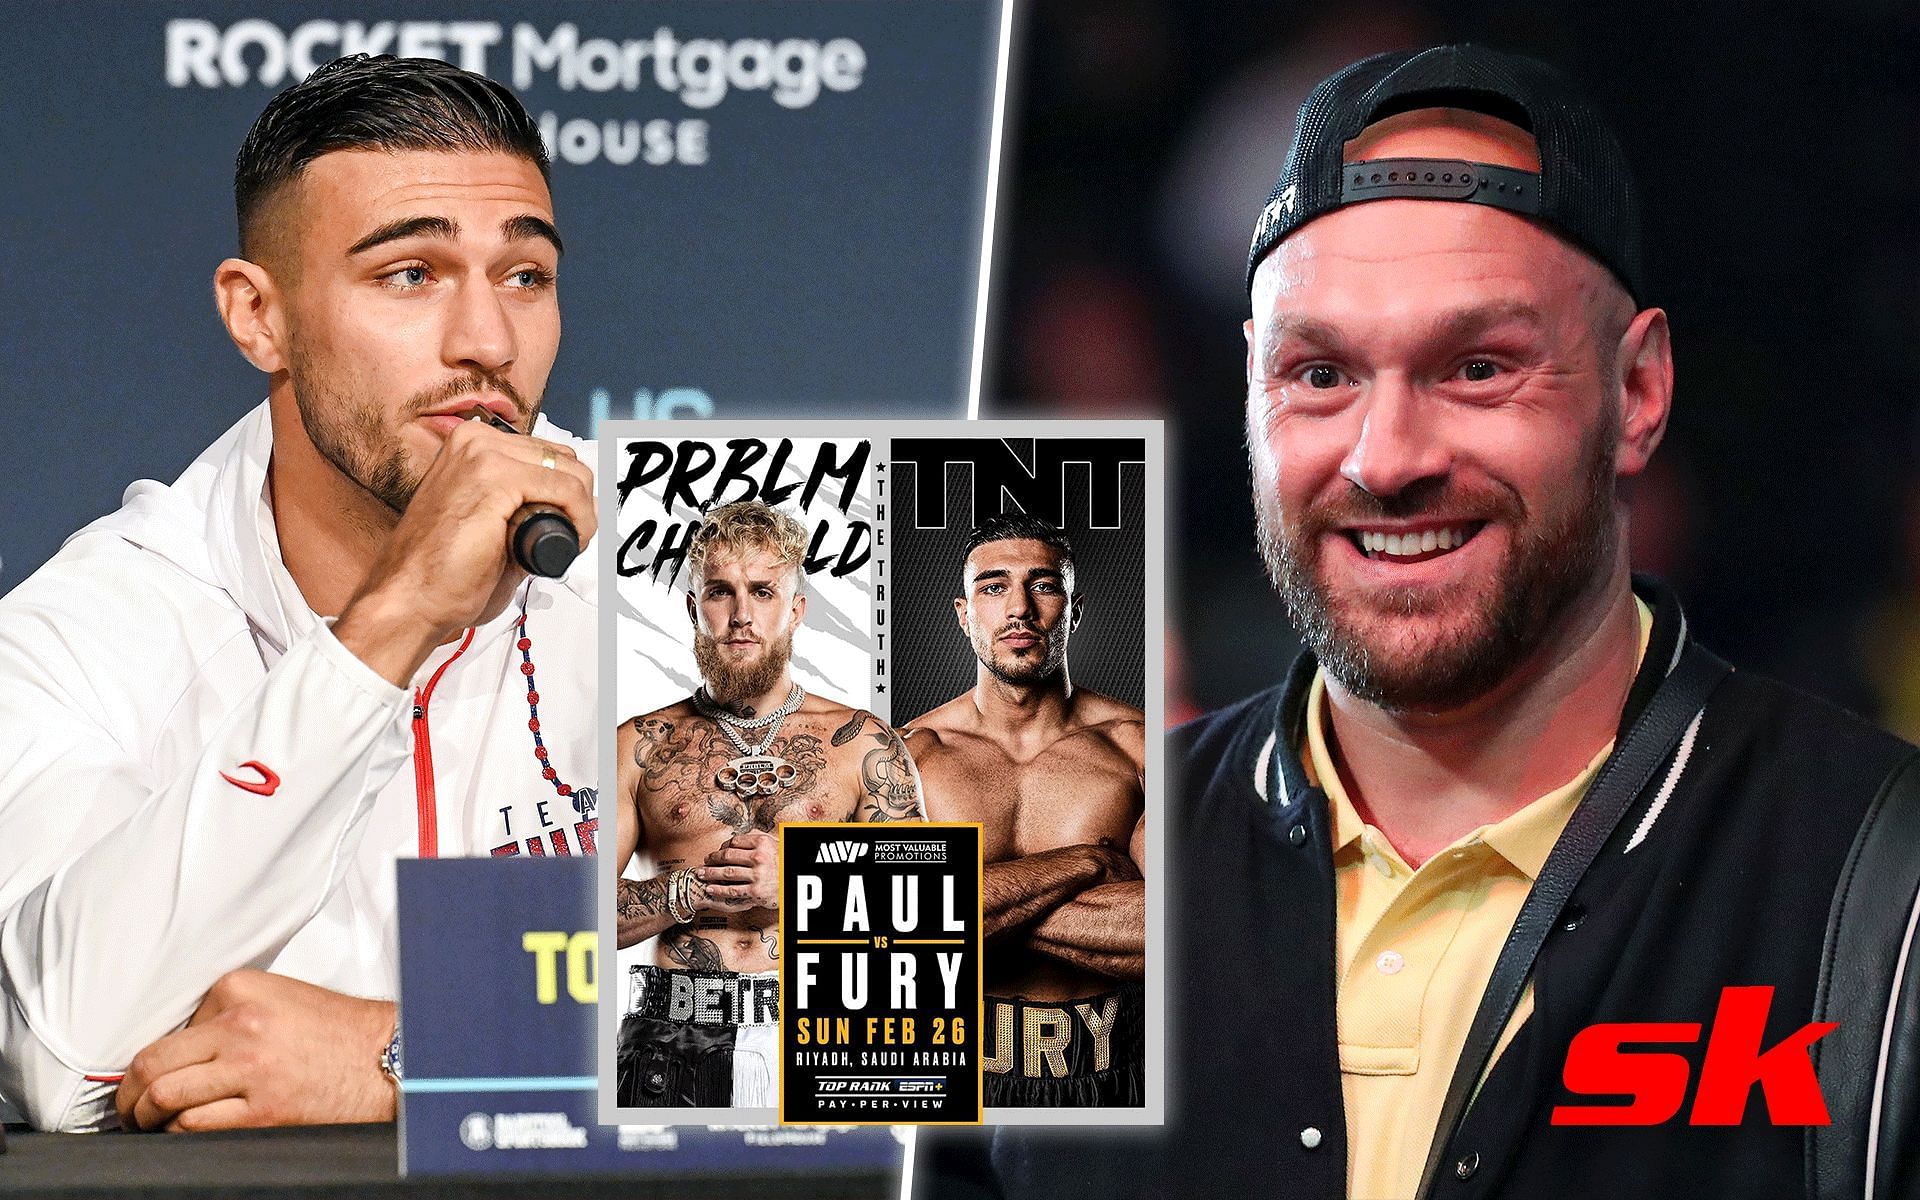 Tommy Fury(left), Jake Paul vs. Tommy Fury poster (middle) and Tyson Fury (right) [Image Credits: Getty Images and @tommyfury on Instagram]